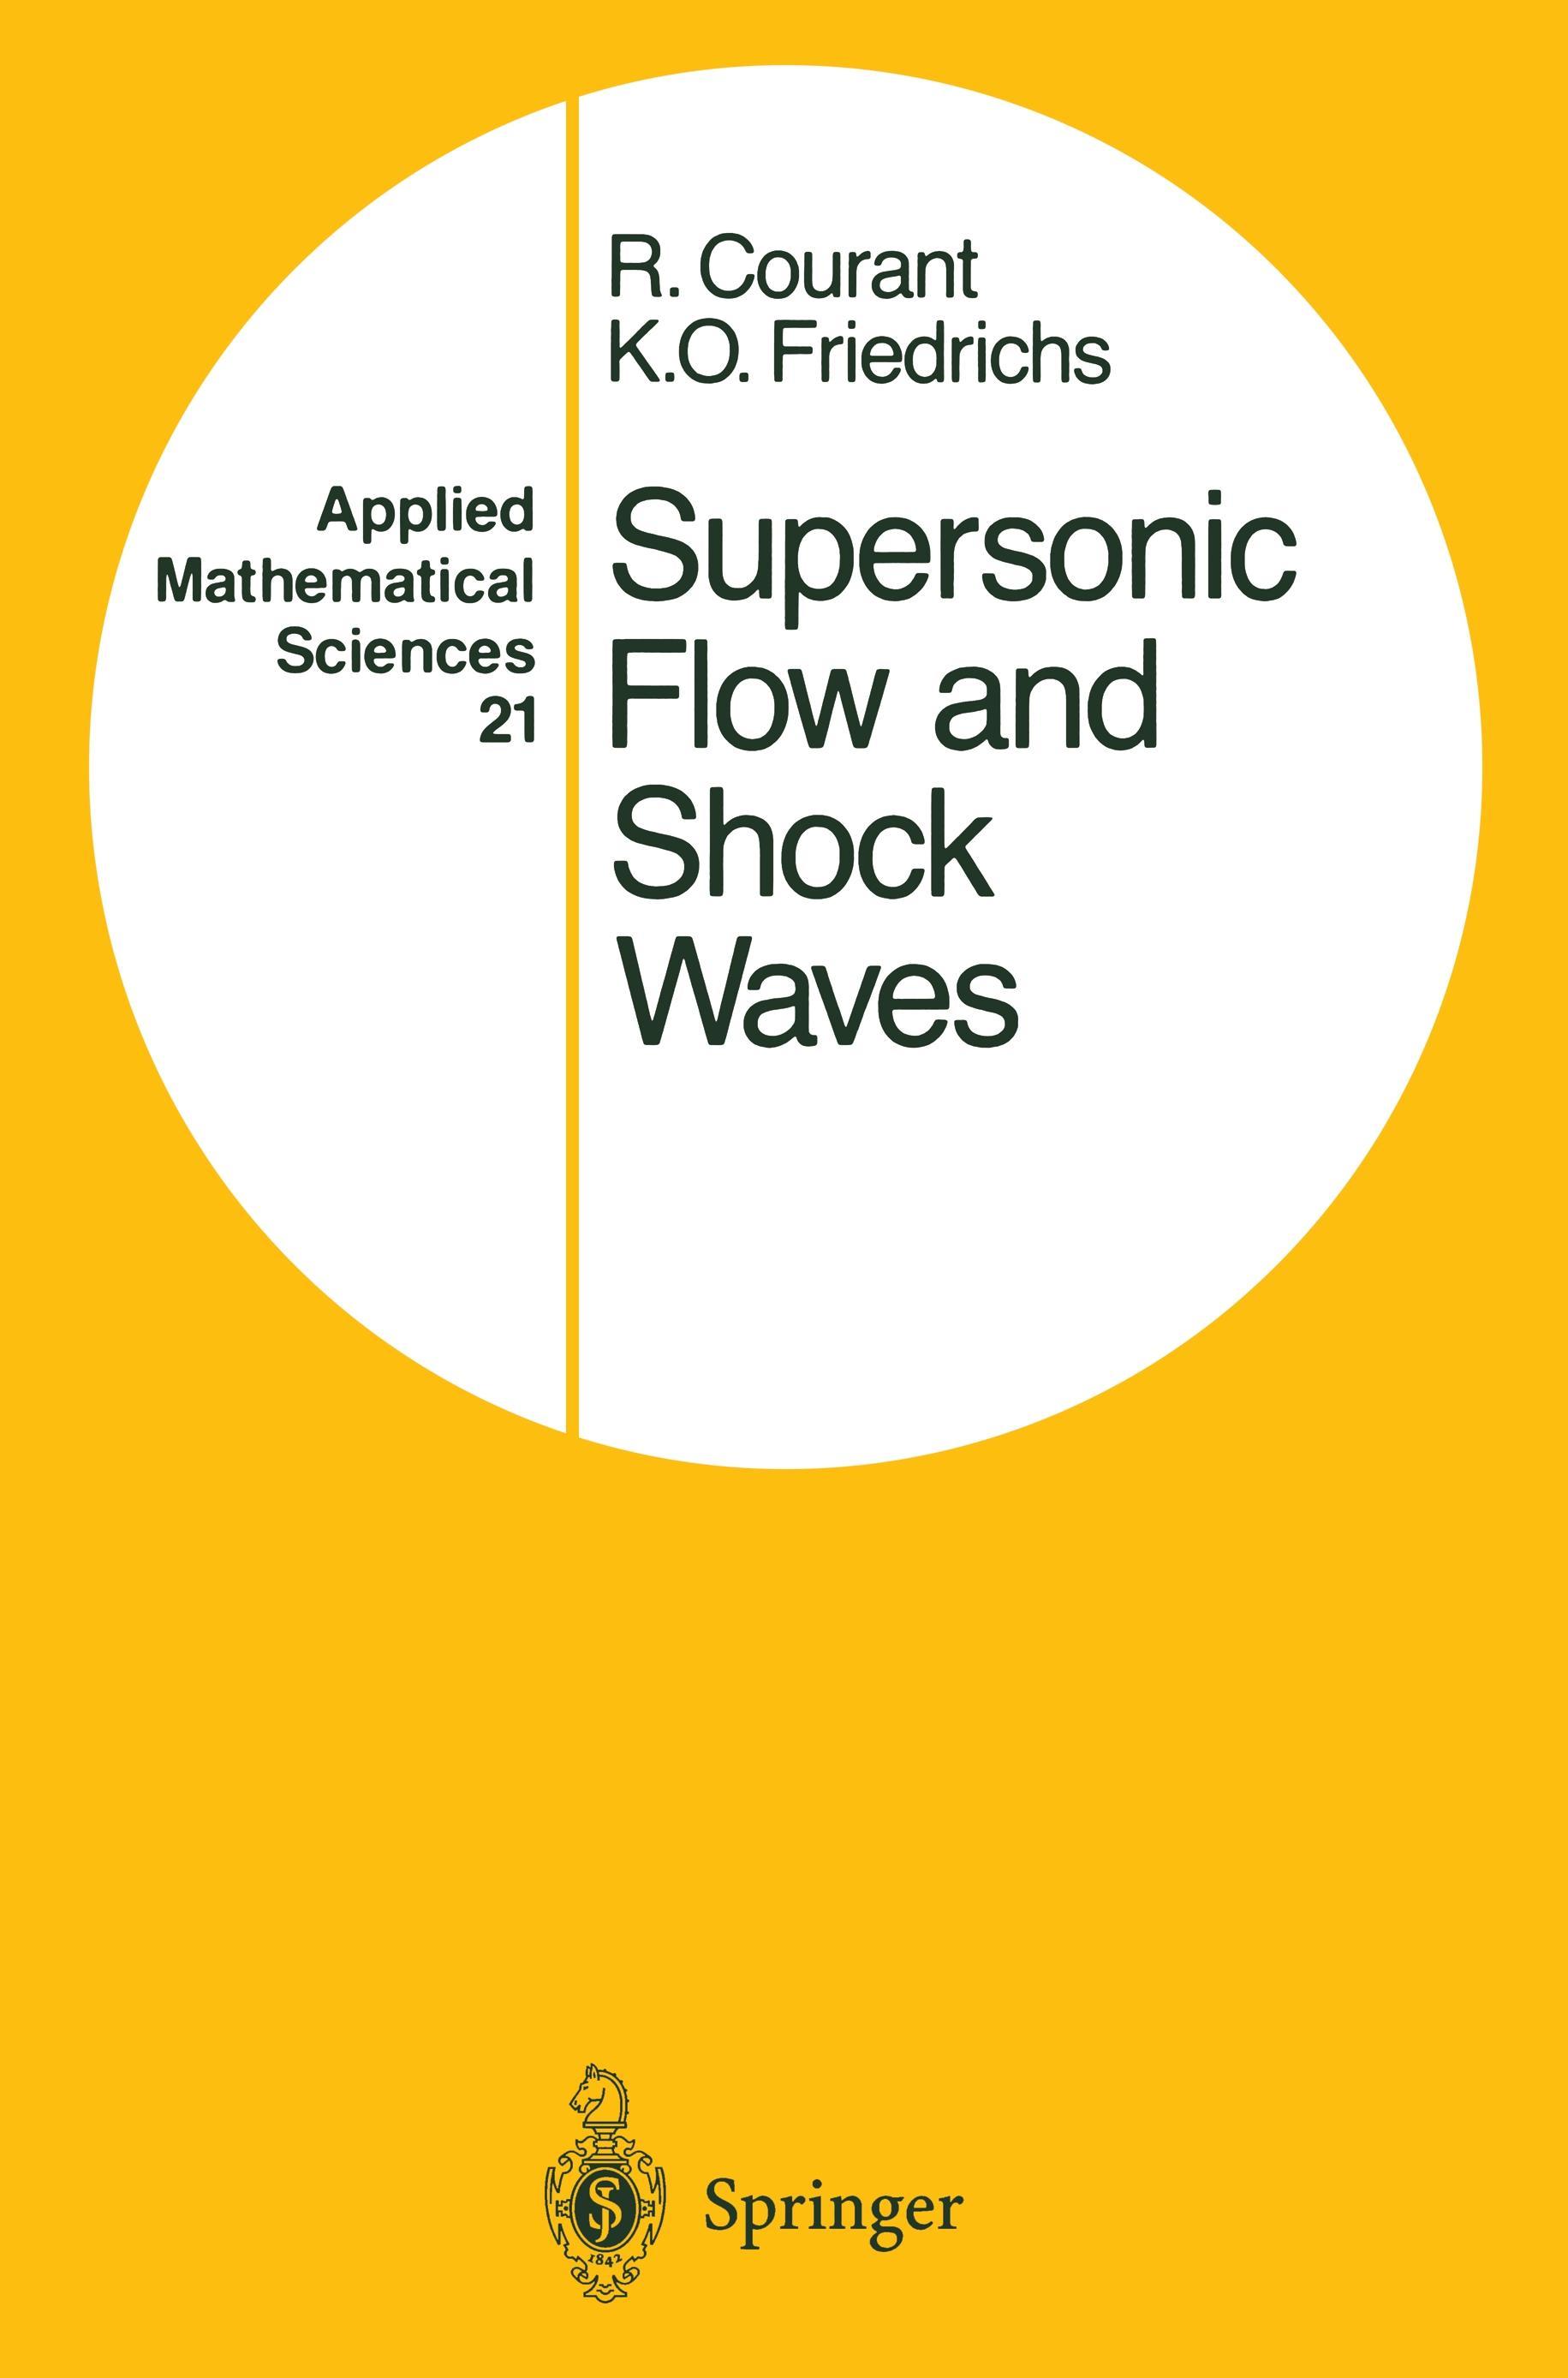 Supersonic Flow and Shock Waves - Richard Courant|K.O. Friedrichs